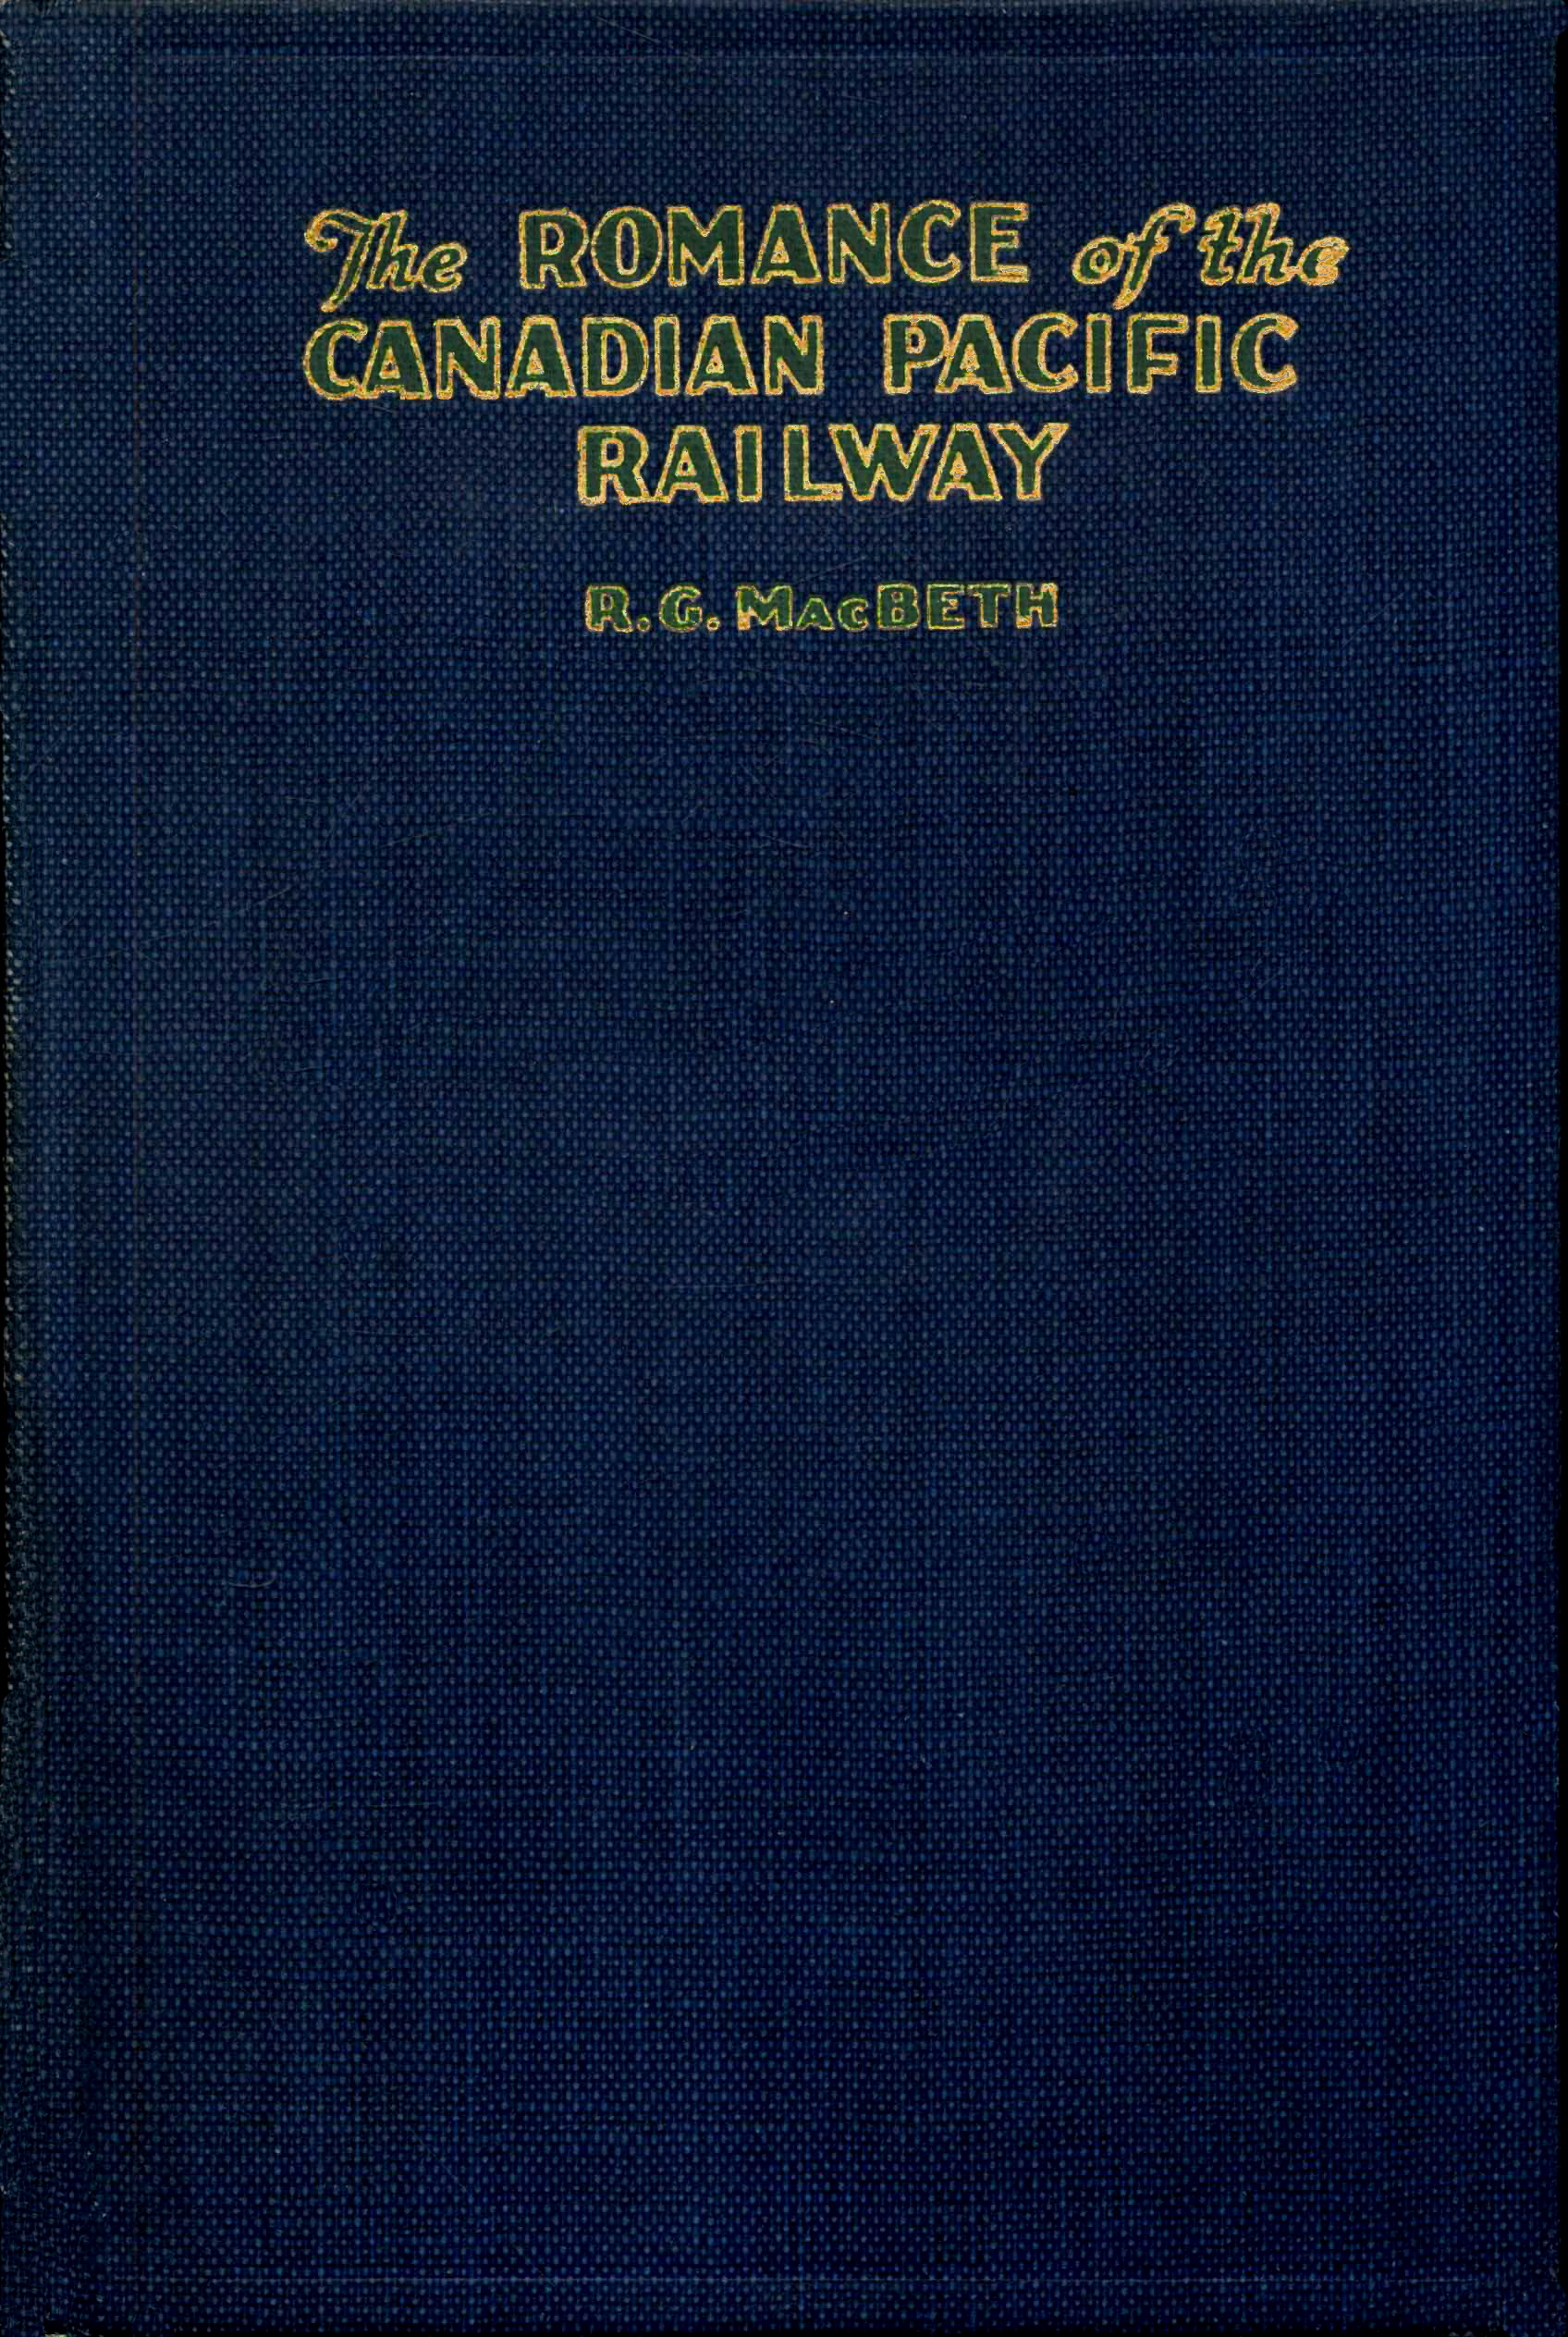 The romance of the Canadian Pacific Railway